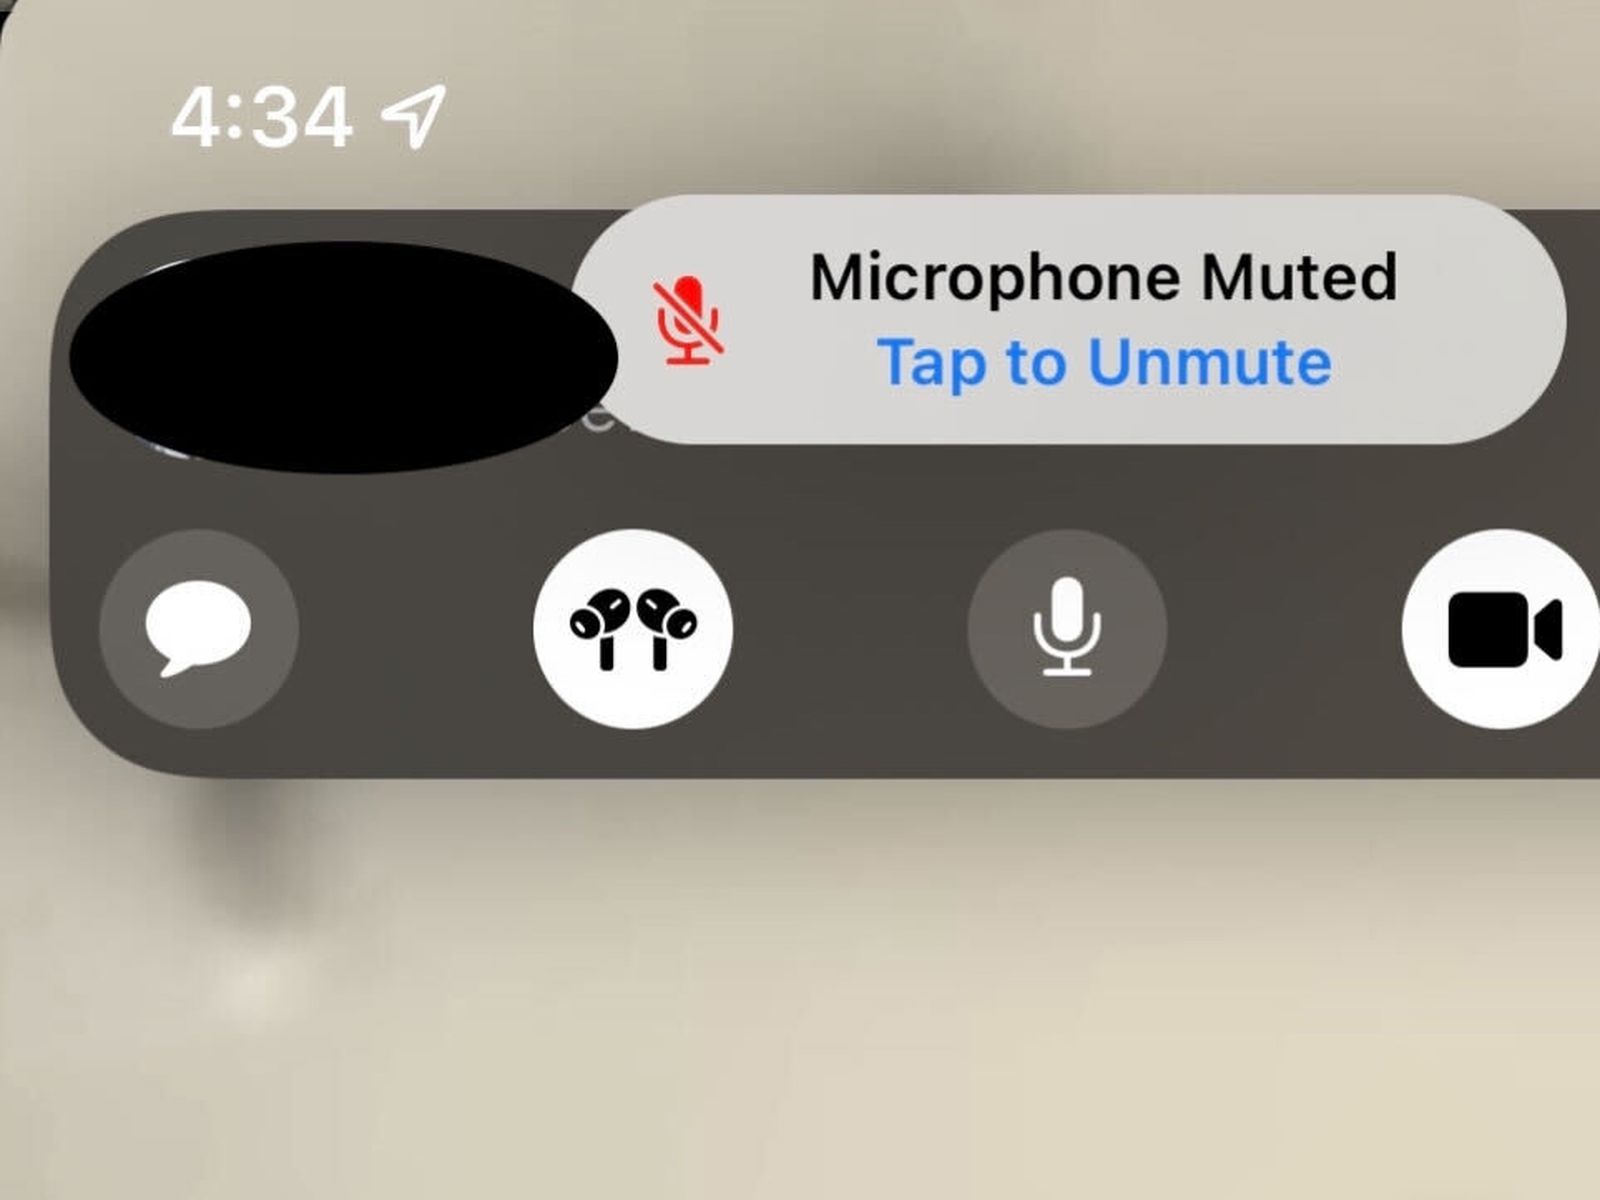 Your microphone is muted from the desktop